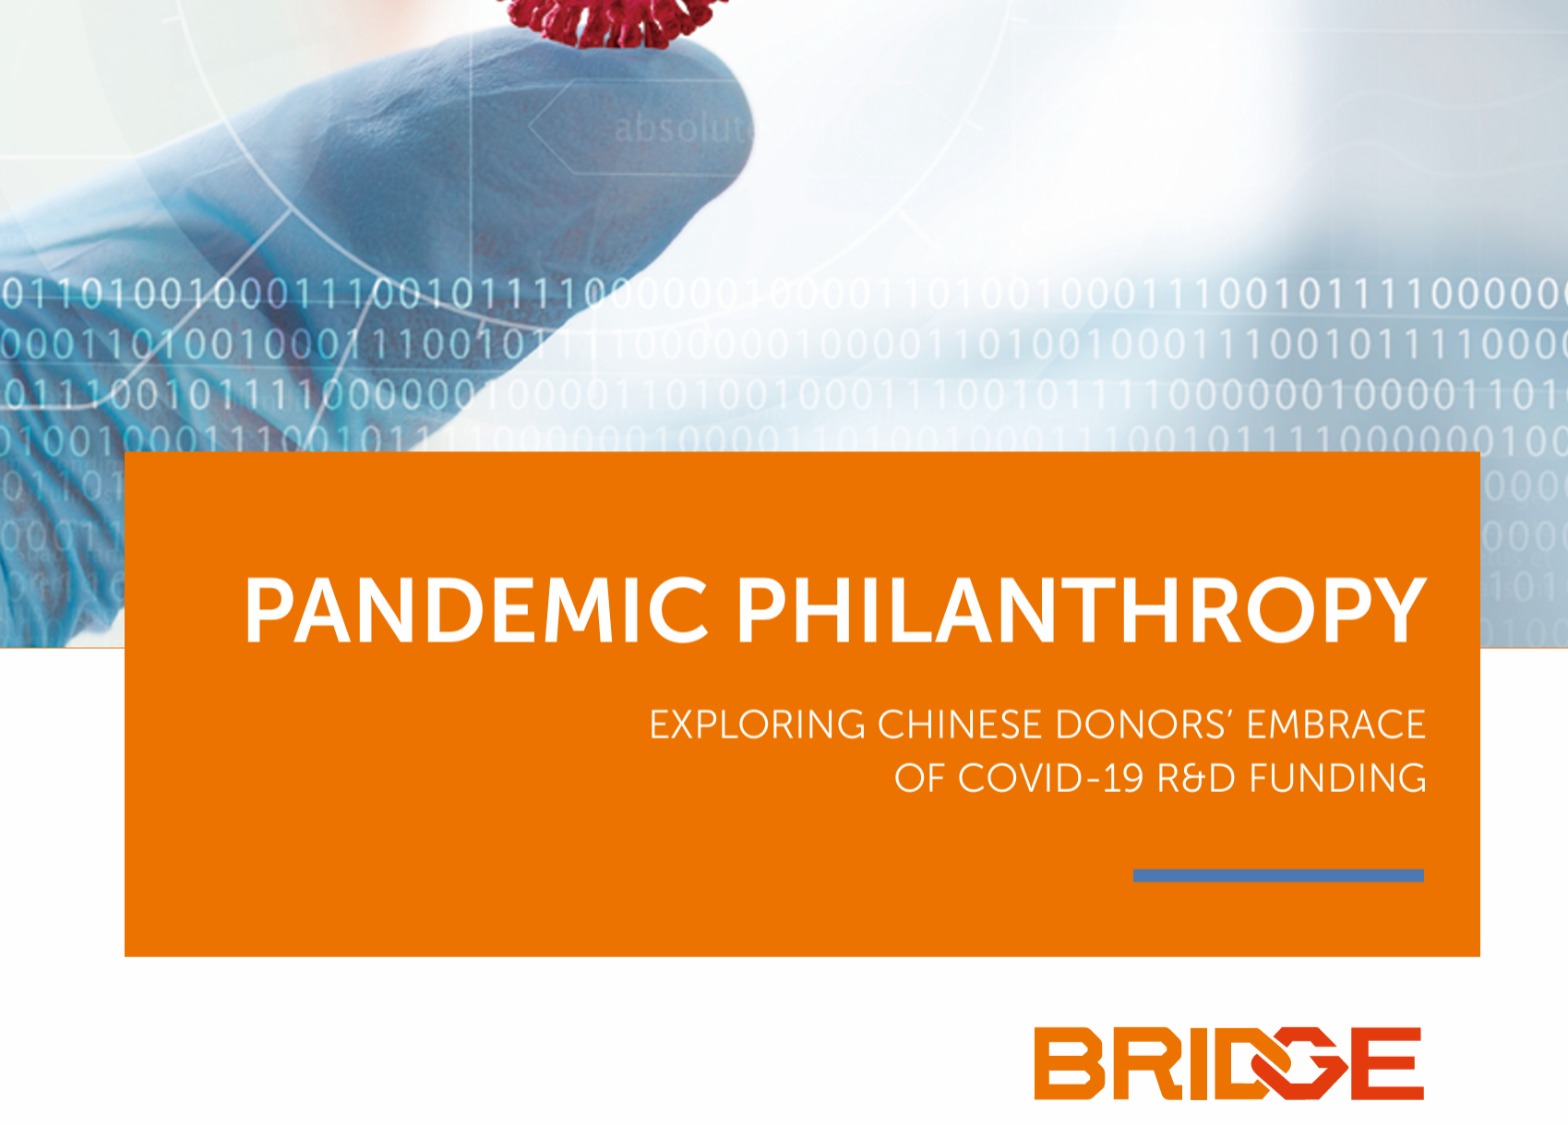 Calling for COVID R&D Collaboration and Giving Through Our Pandemic Philanthropy Report